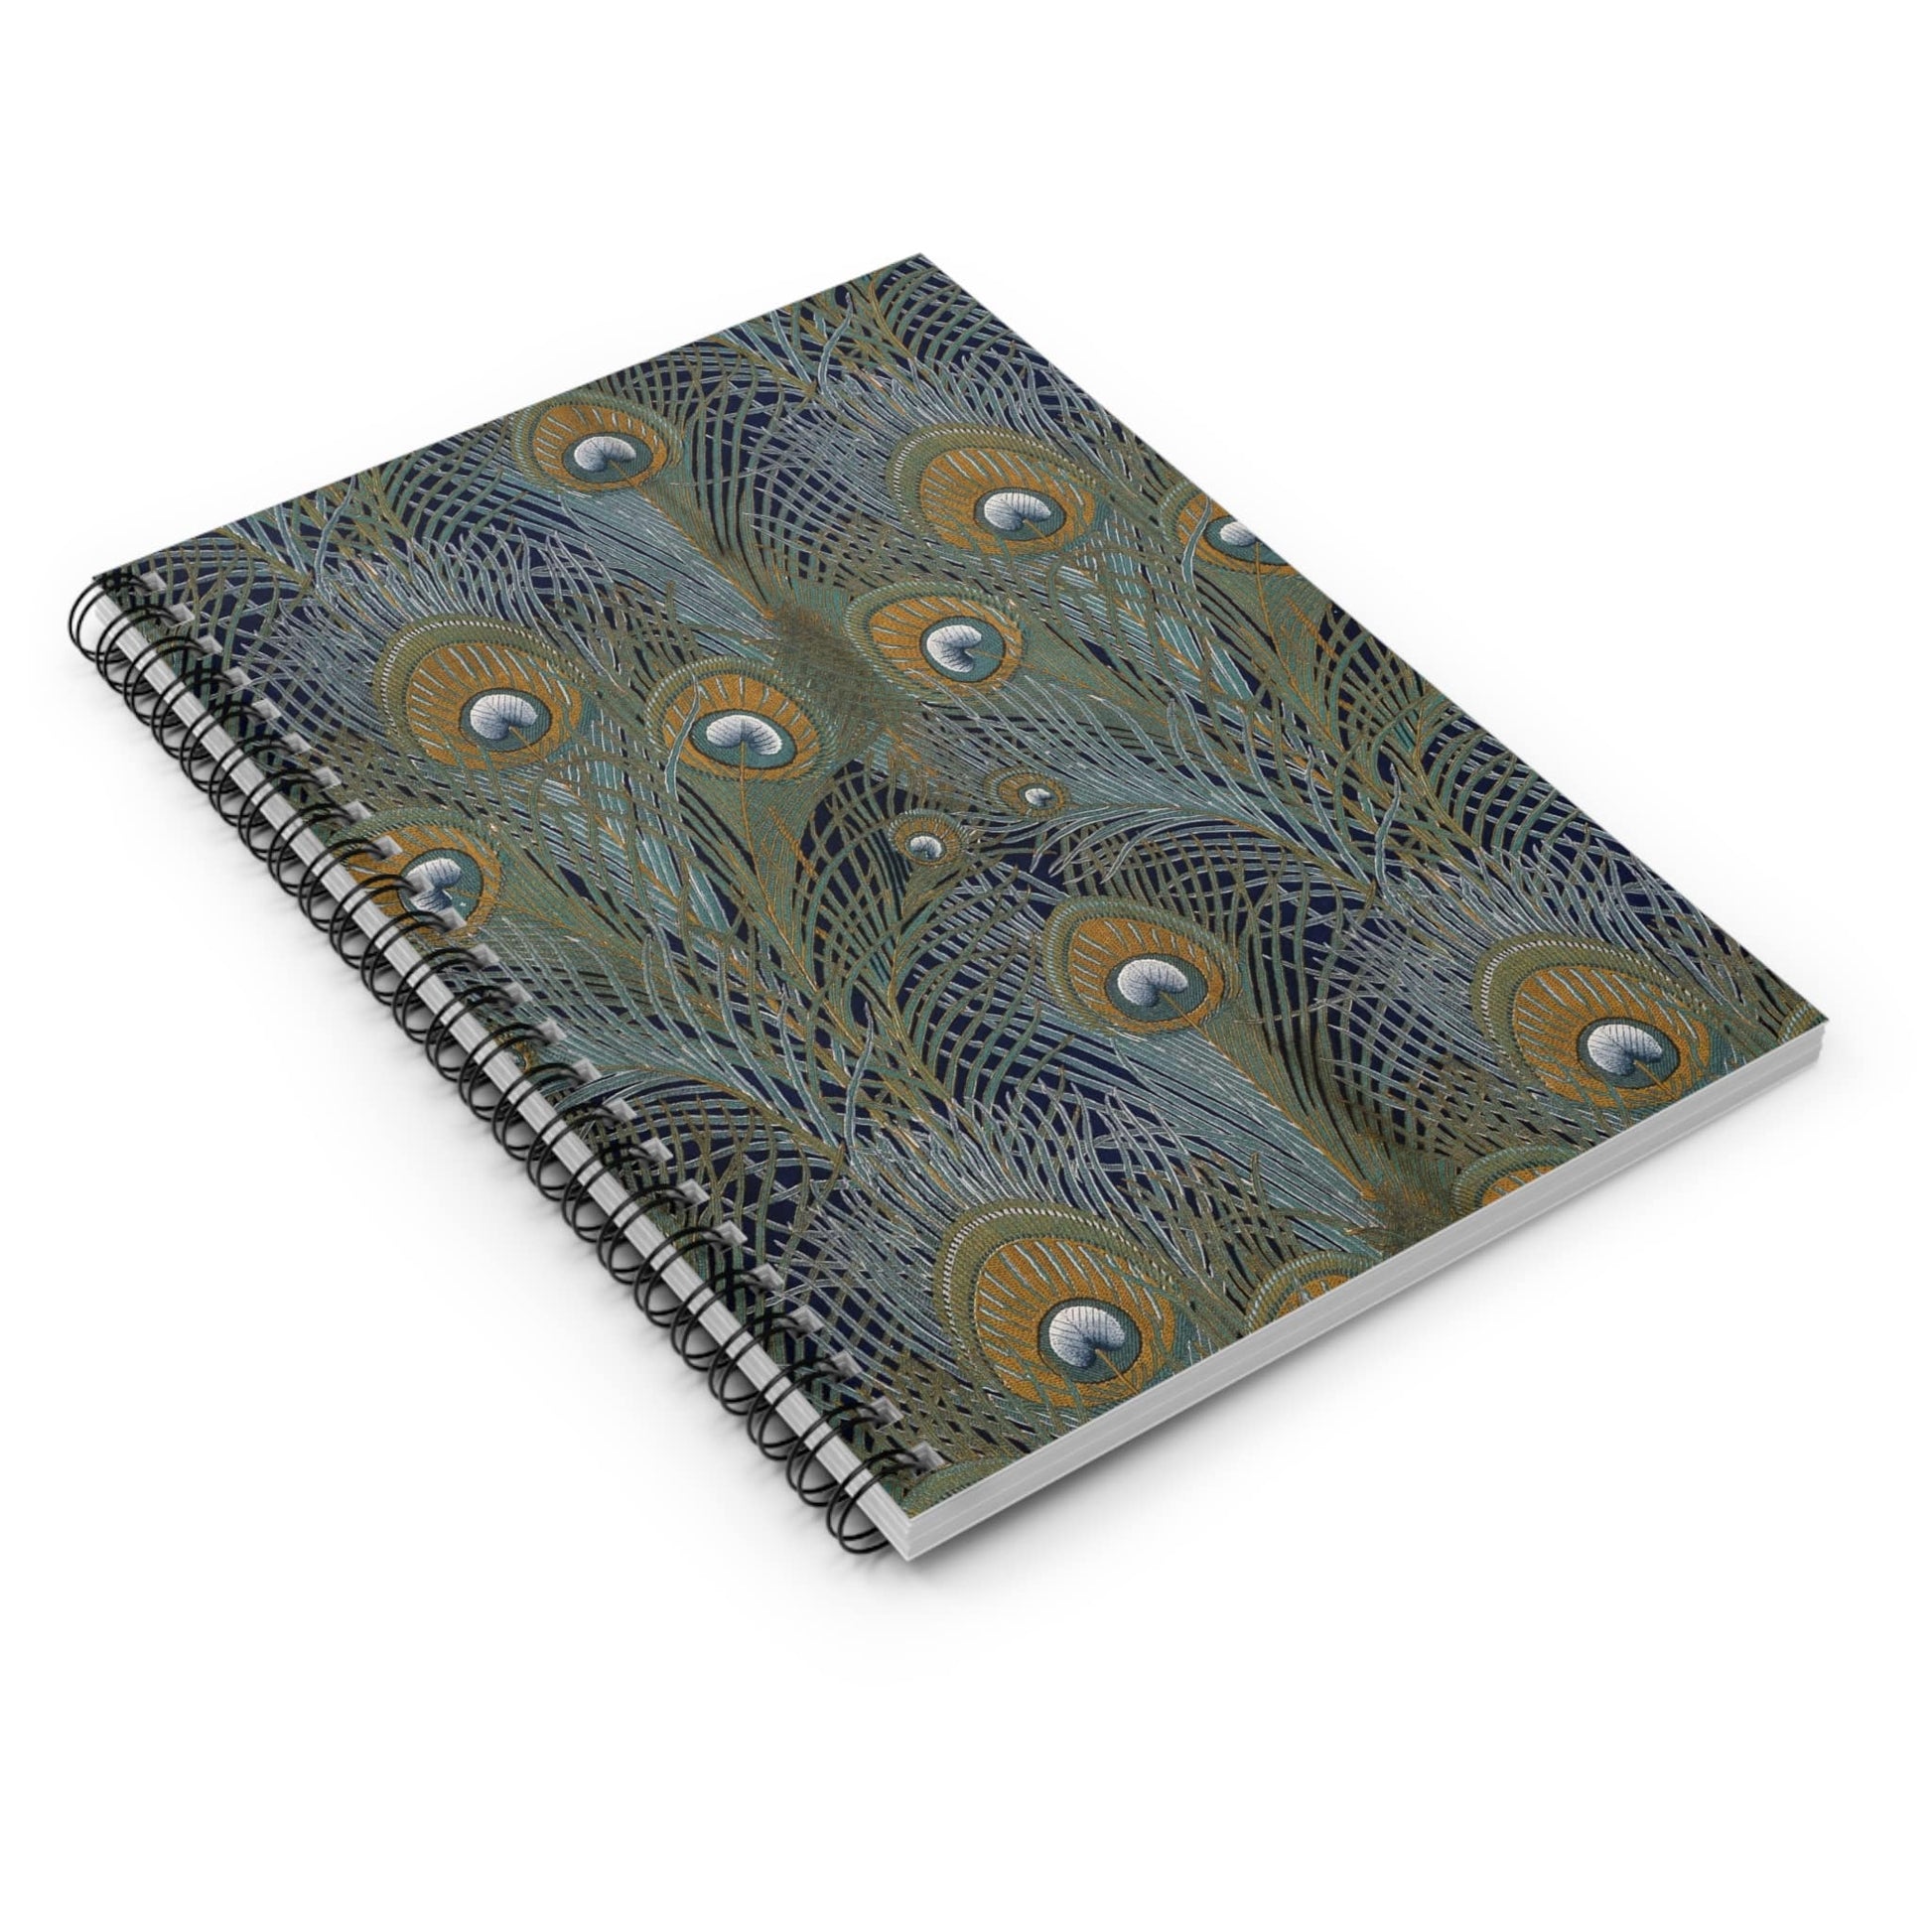 Boho Aesthetic Spiral Notebook Laying Flat on White Surface